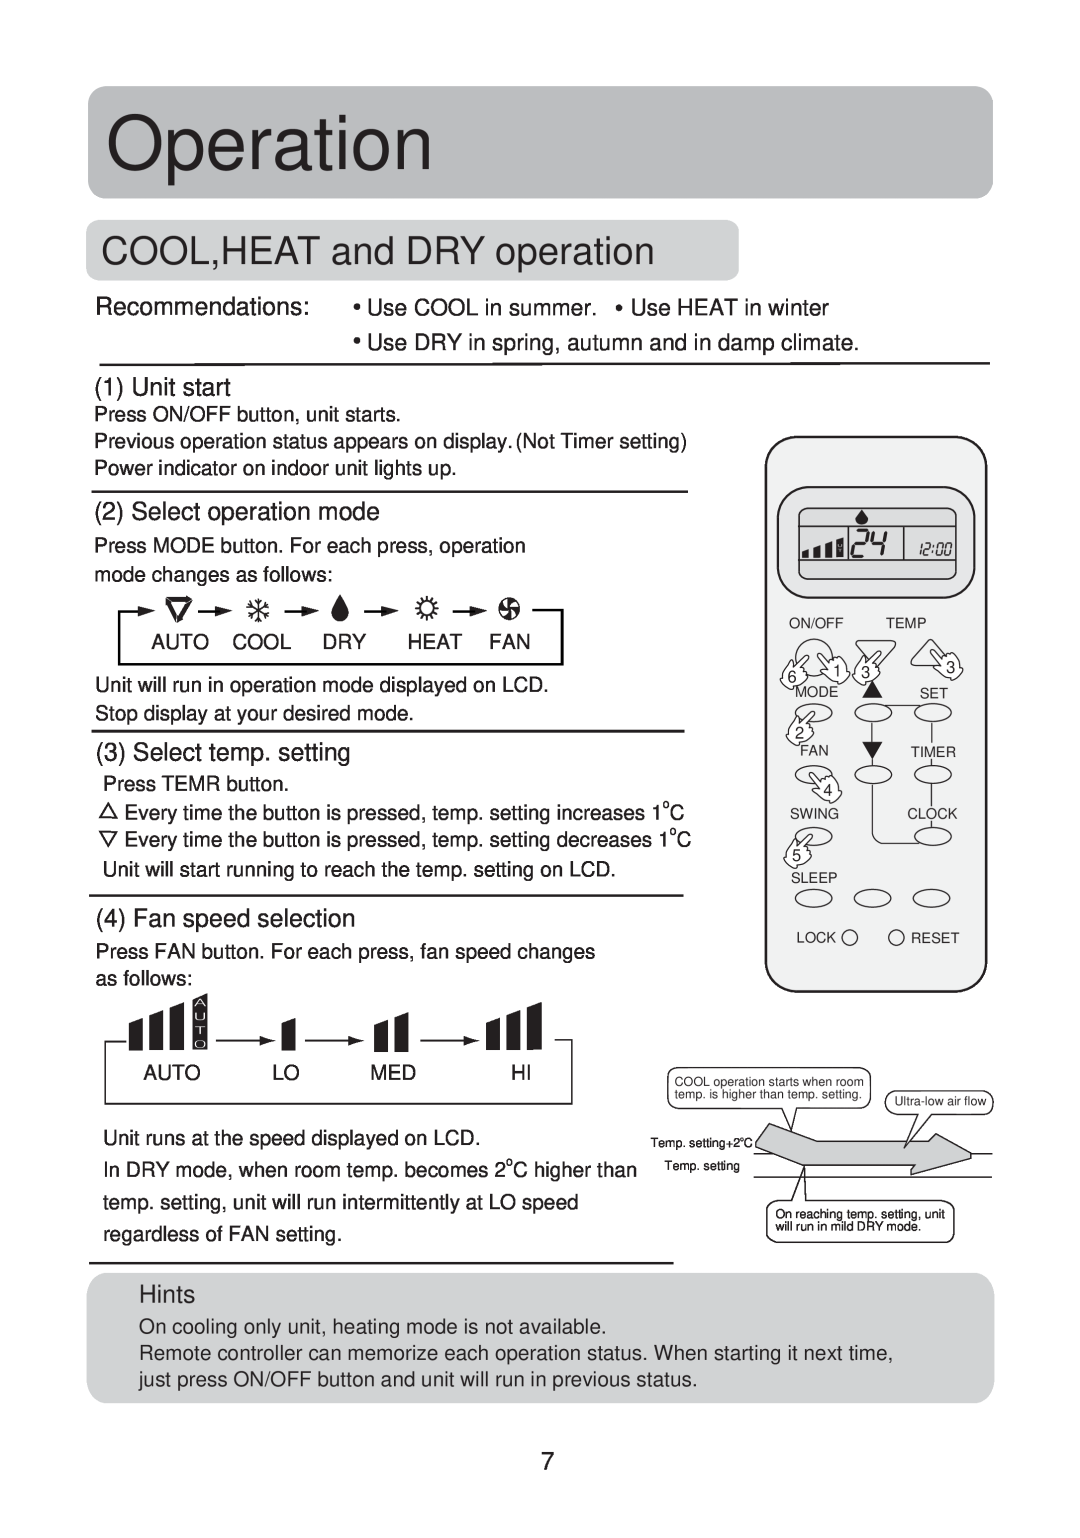 Haier No. 0010551809 COOL,HEAT and DRY operation, Operation, Unit start, Select operation mode, Select temp. setting 